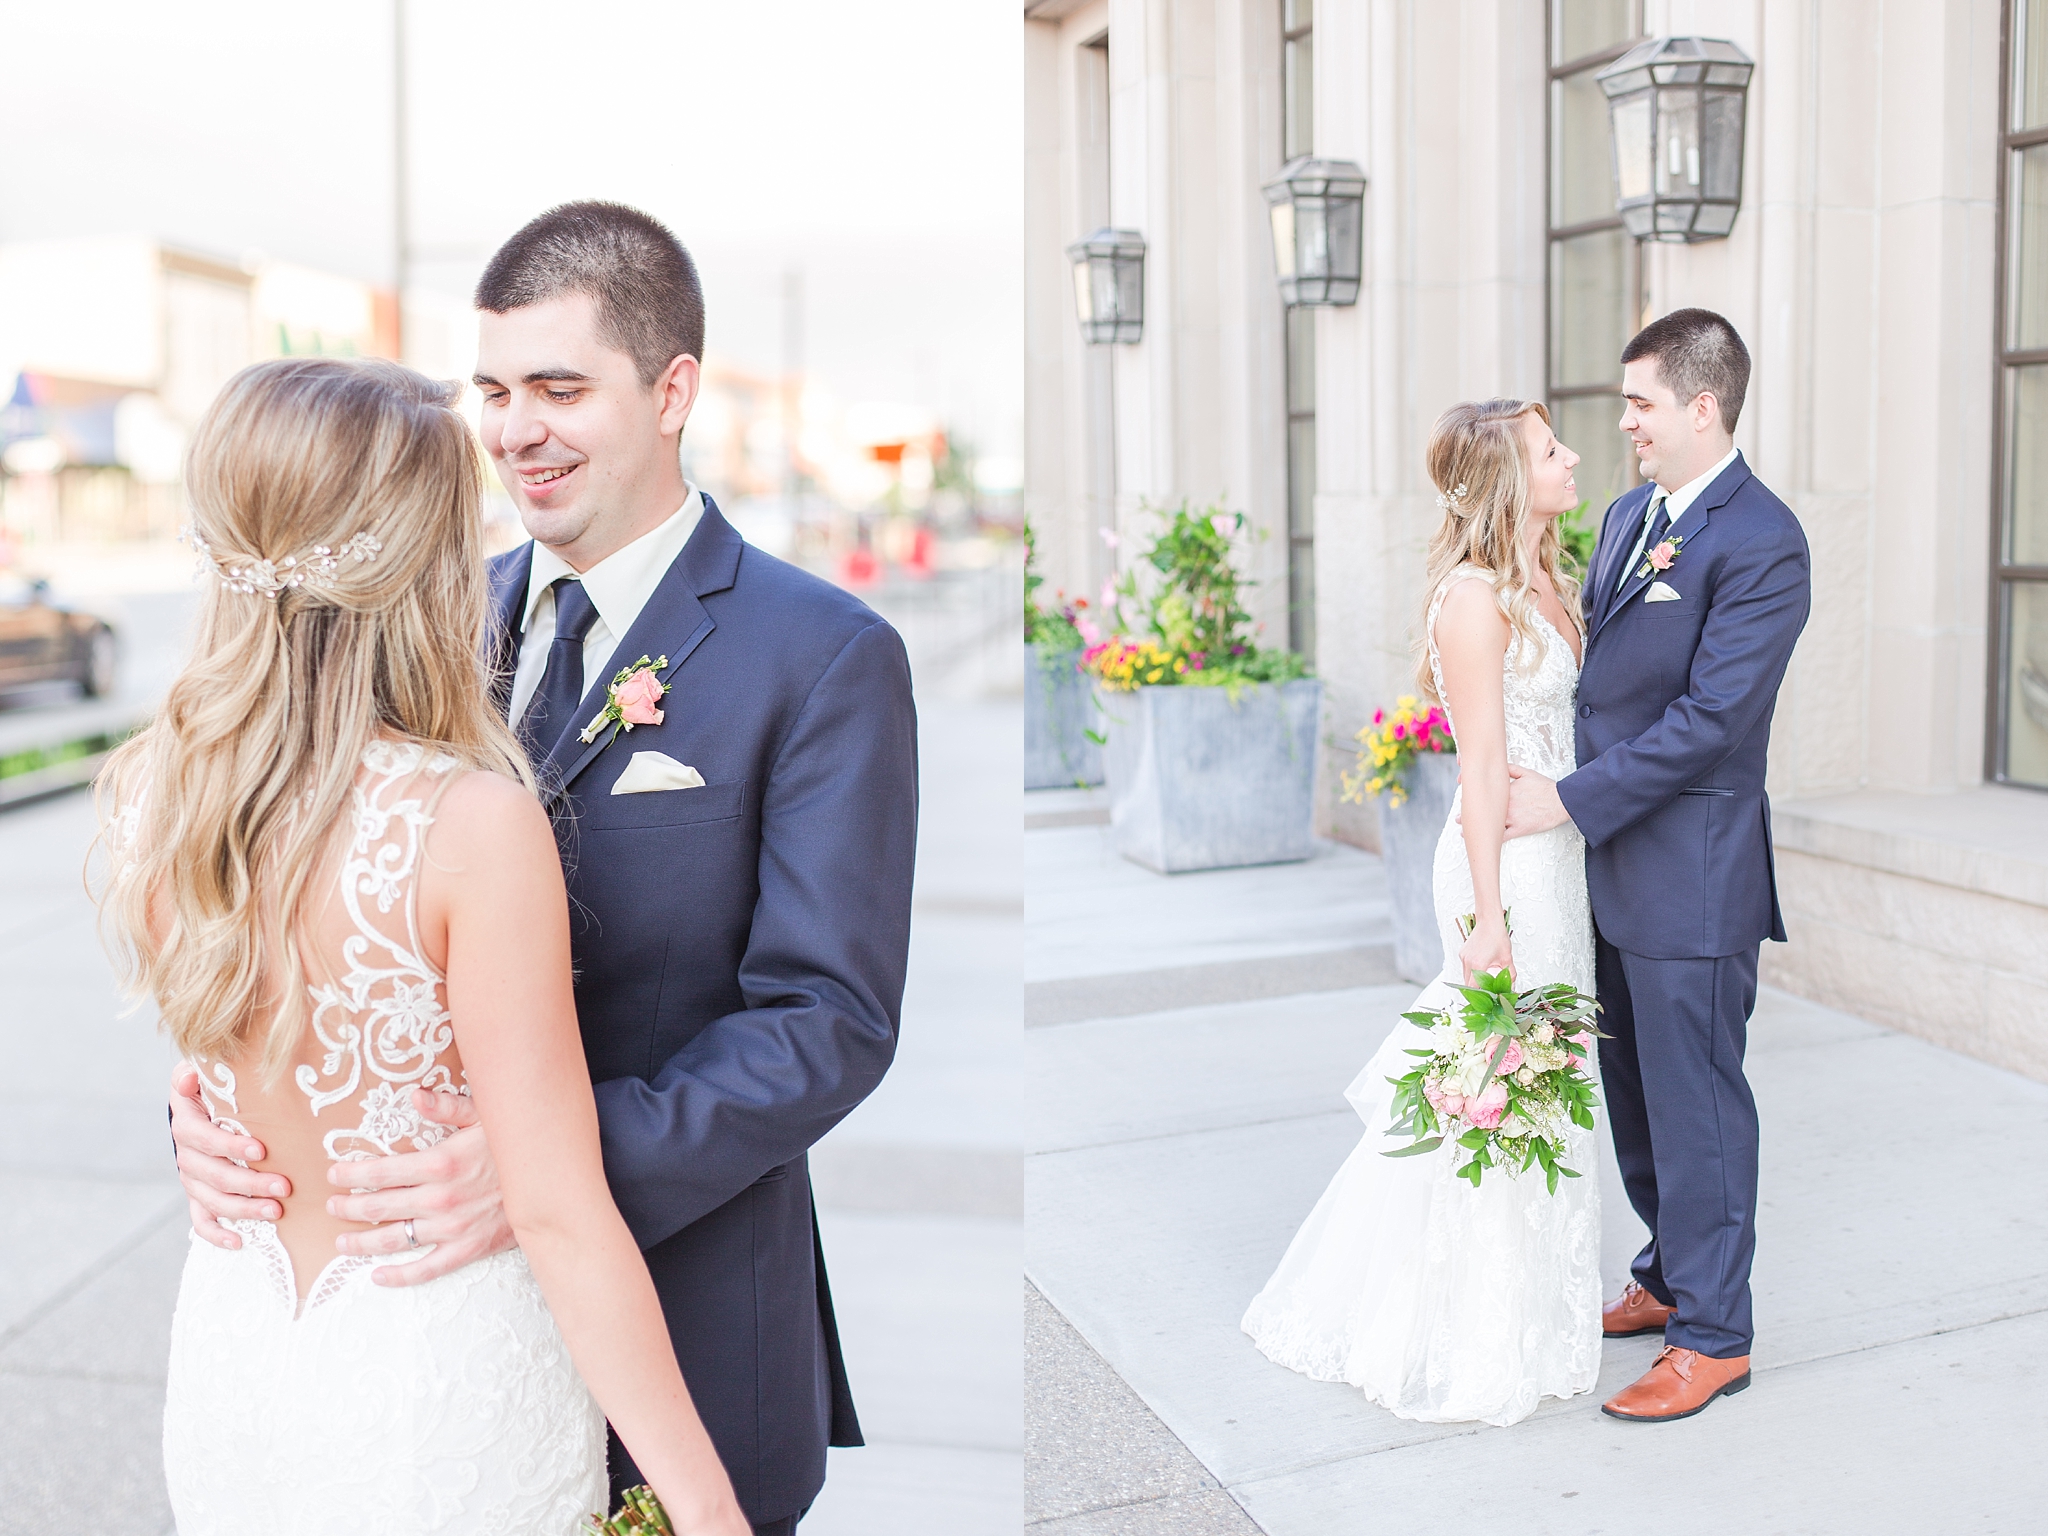 candid-romantic-wedding-photos-at-the-h-hotel-in-midland-michigan-by-courtney-carolyn-photography_0106.jpg